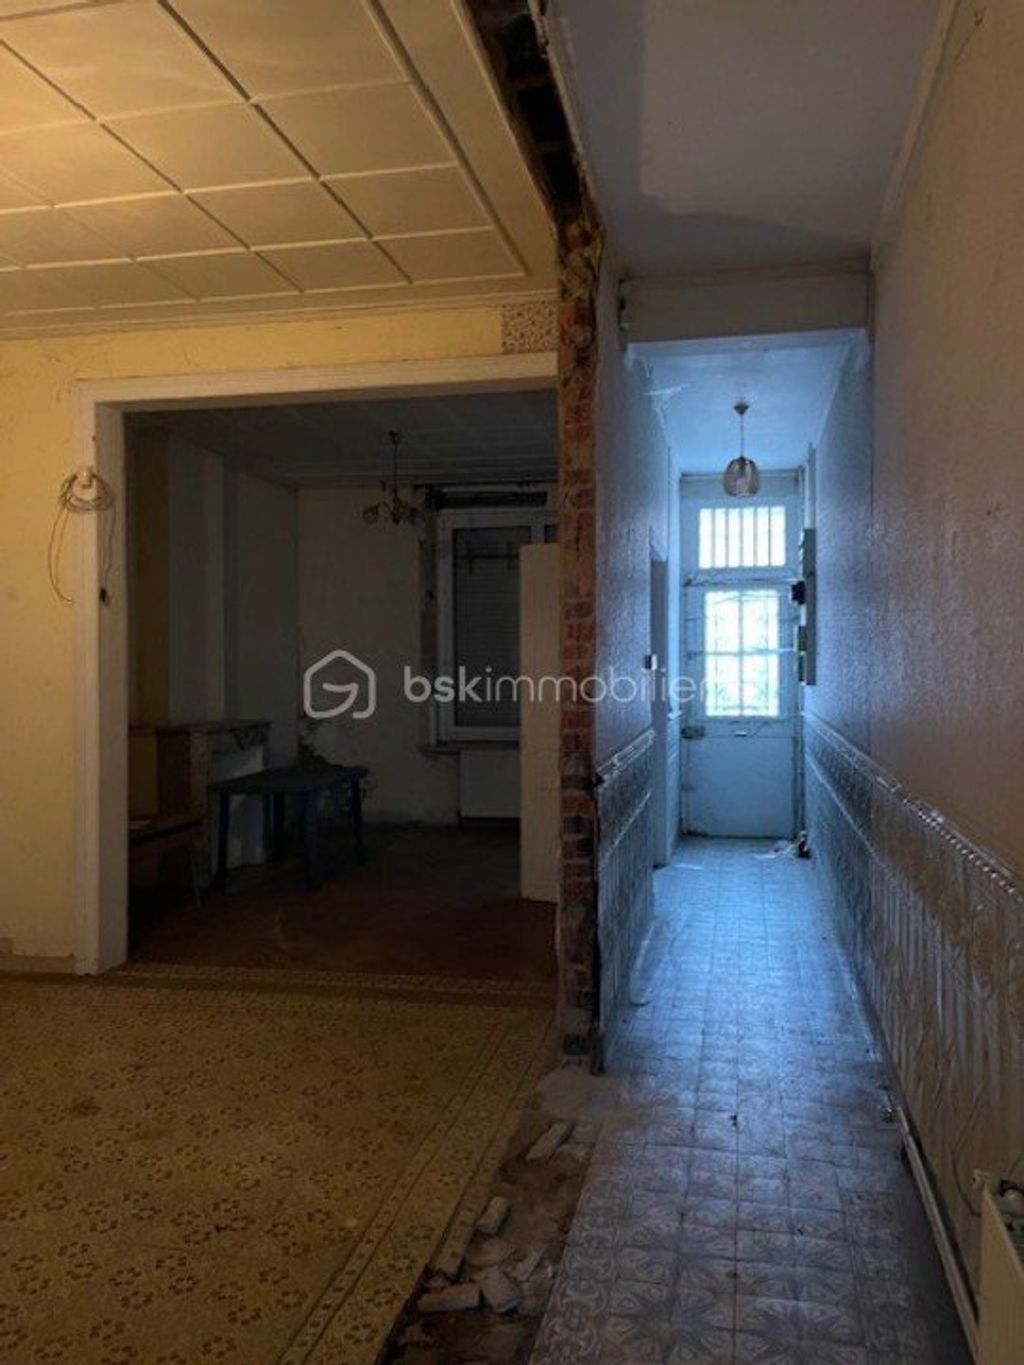 Achat maison 4 chambre(s) - Billy-Montigny